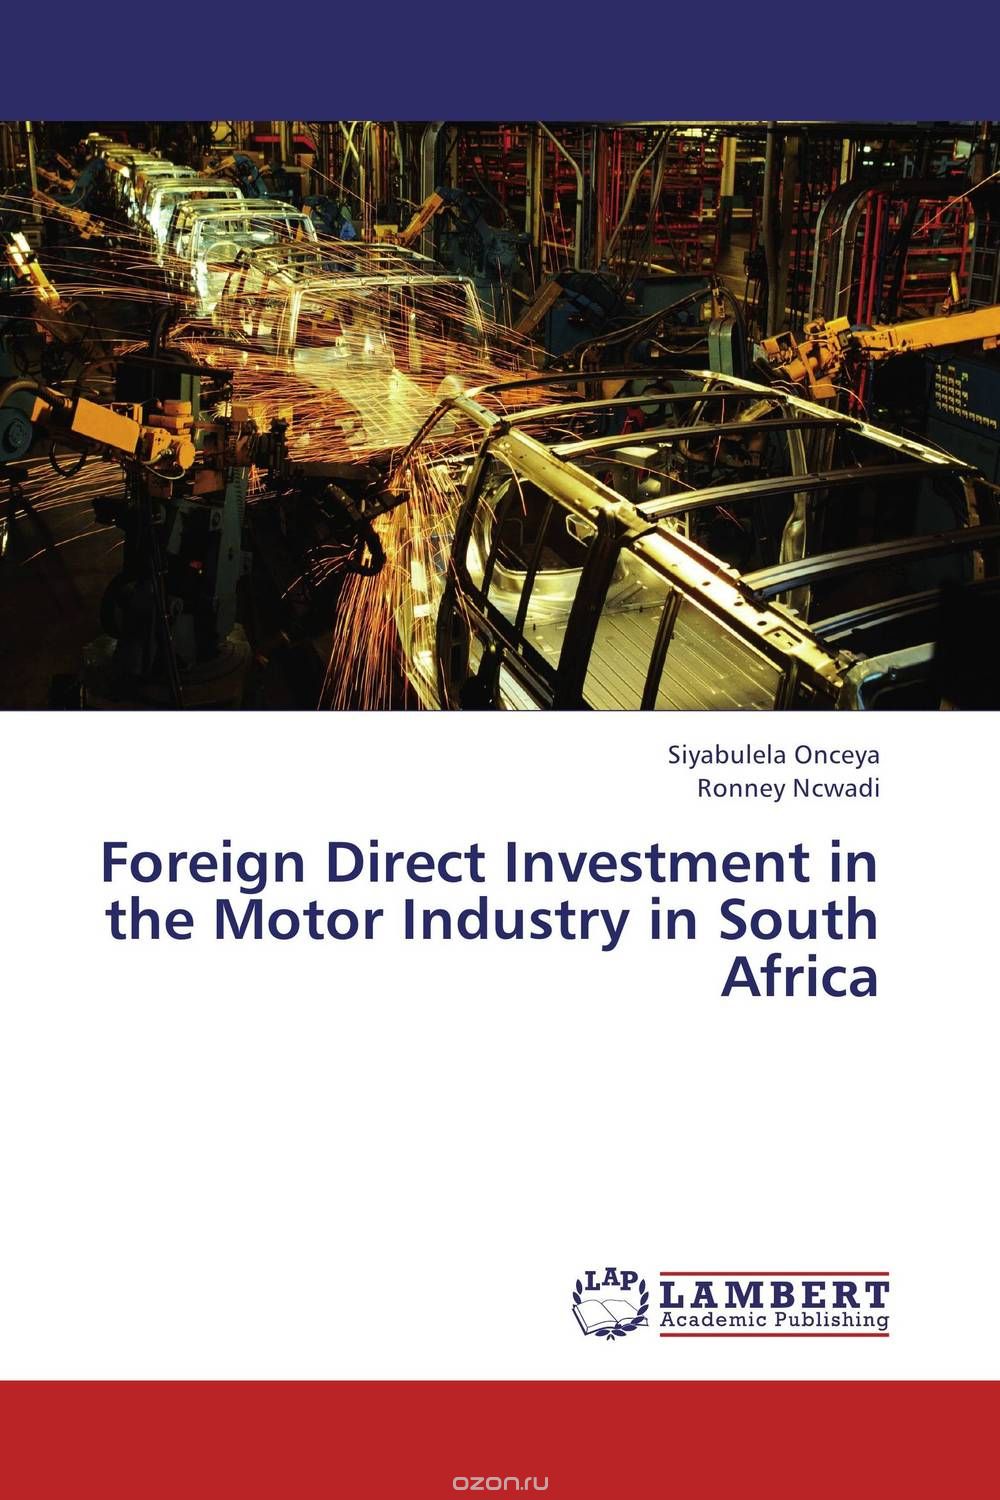 Скачать книгу "Foreign Direct Investment in the Motor Industry in South Africa"